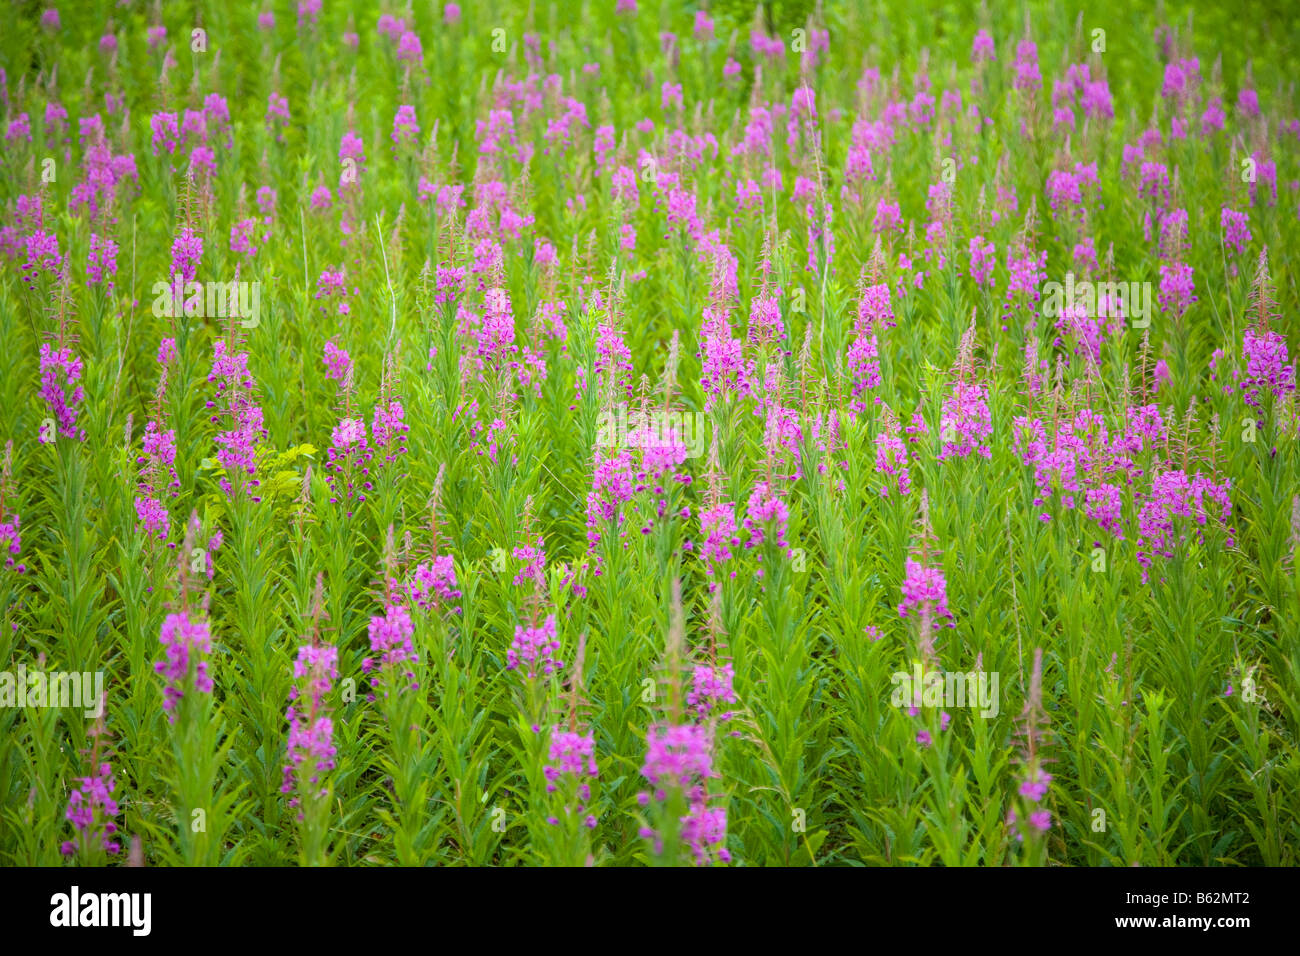 Summer meadow of Rosebay Willowherb, or fireweed, County Down, Northern Ireland, UK. Stock Photo